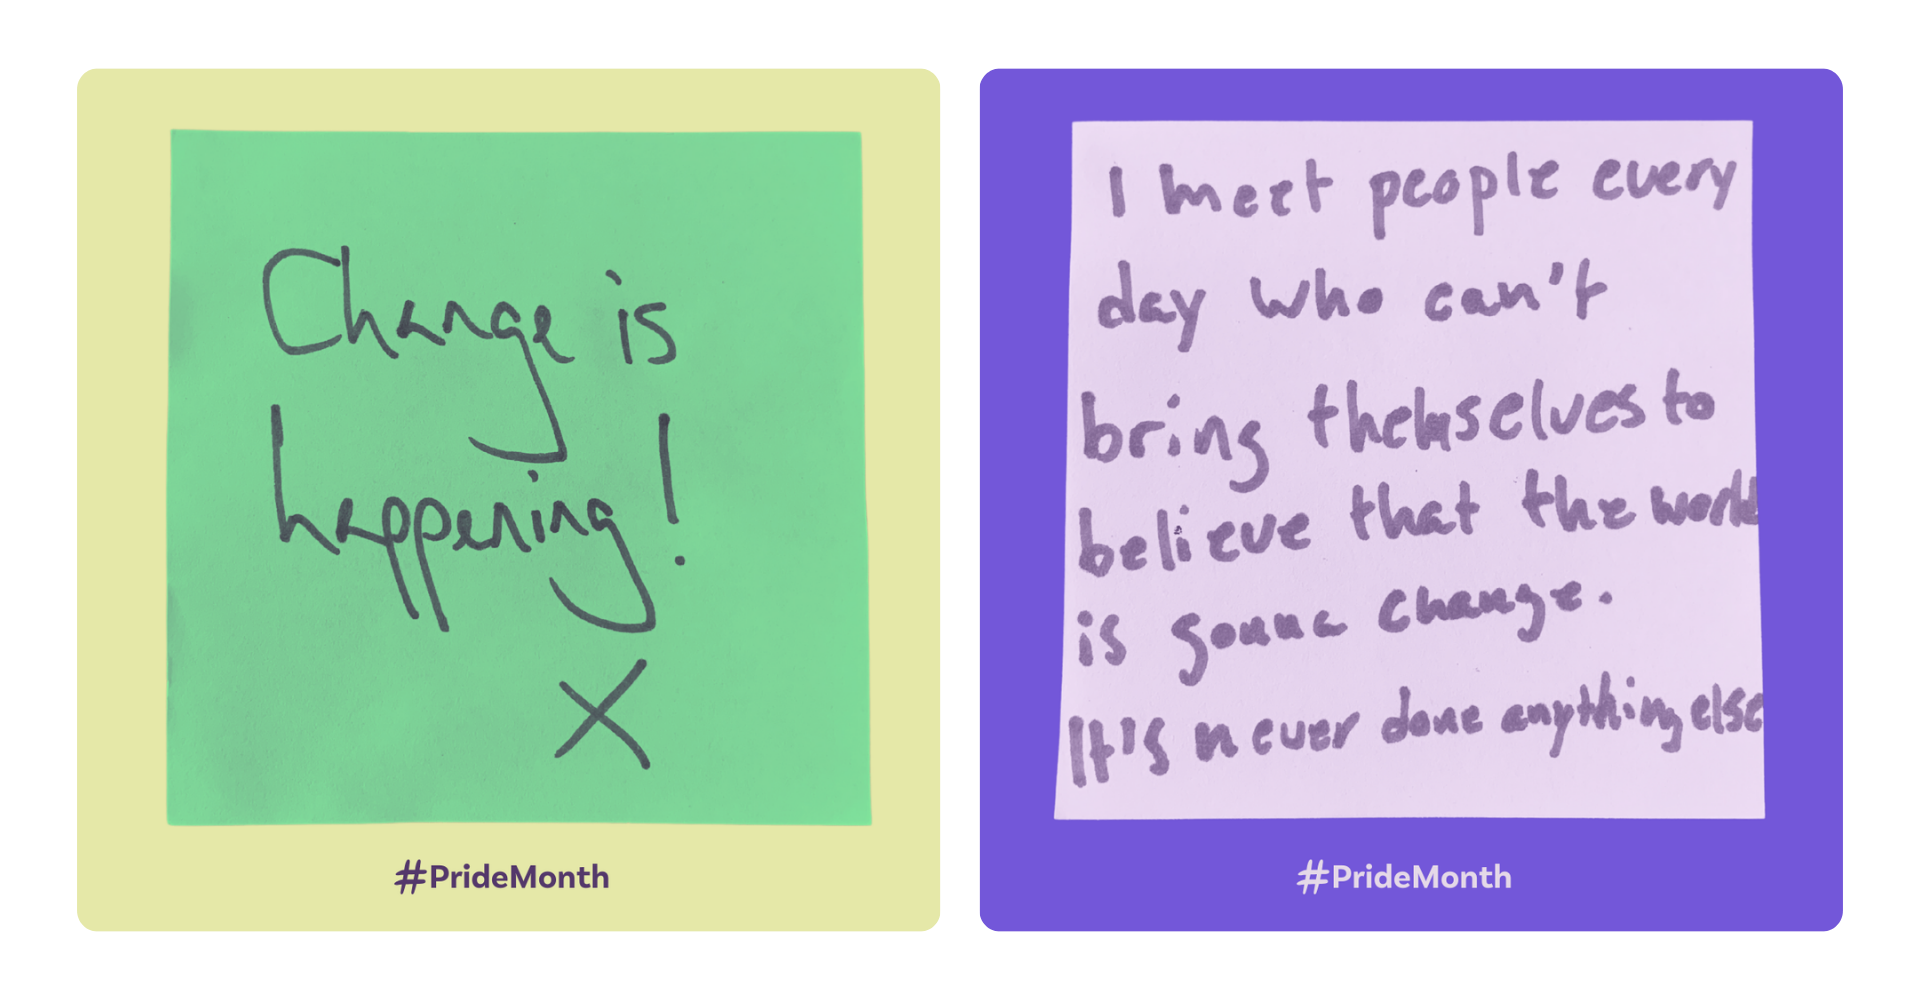 Two images of post-it notes with writing on them. Note 1 reads: "Change is happening!" Note 2 reads: "I meet people every day who can't bring themselves to believe that the world is gonna change. It's never done anything else"